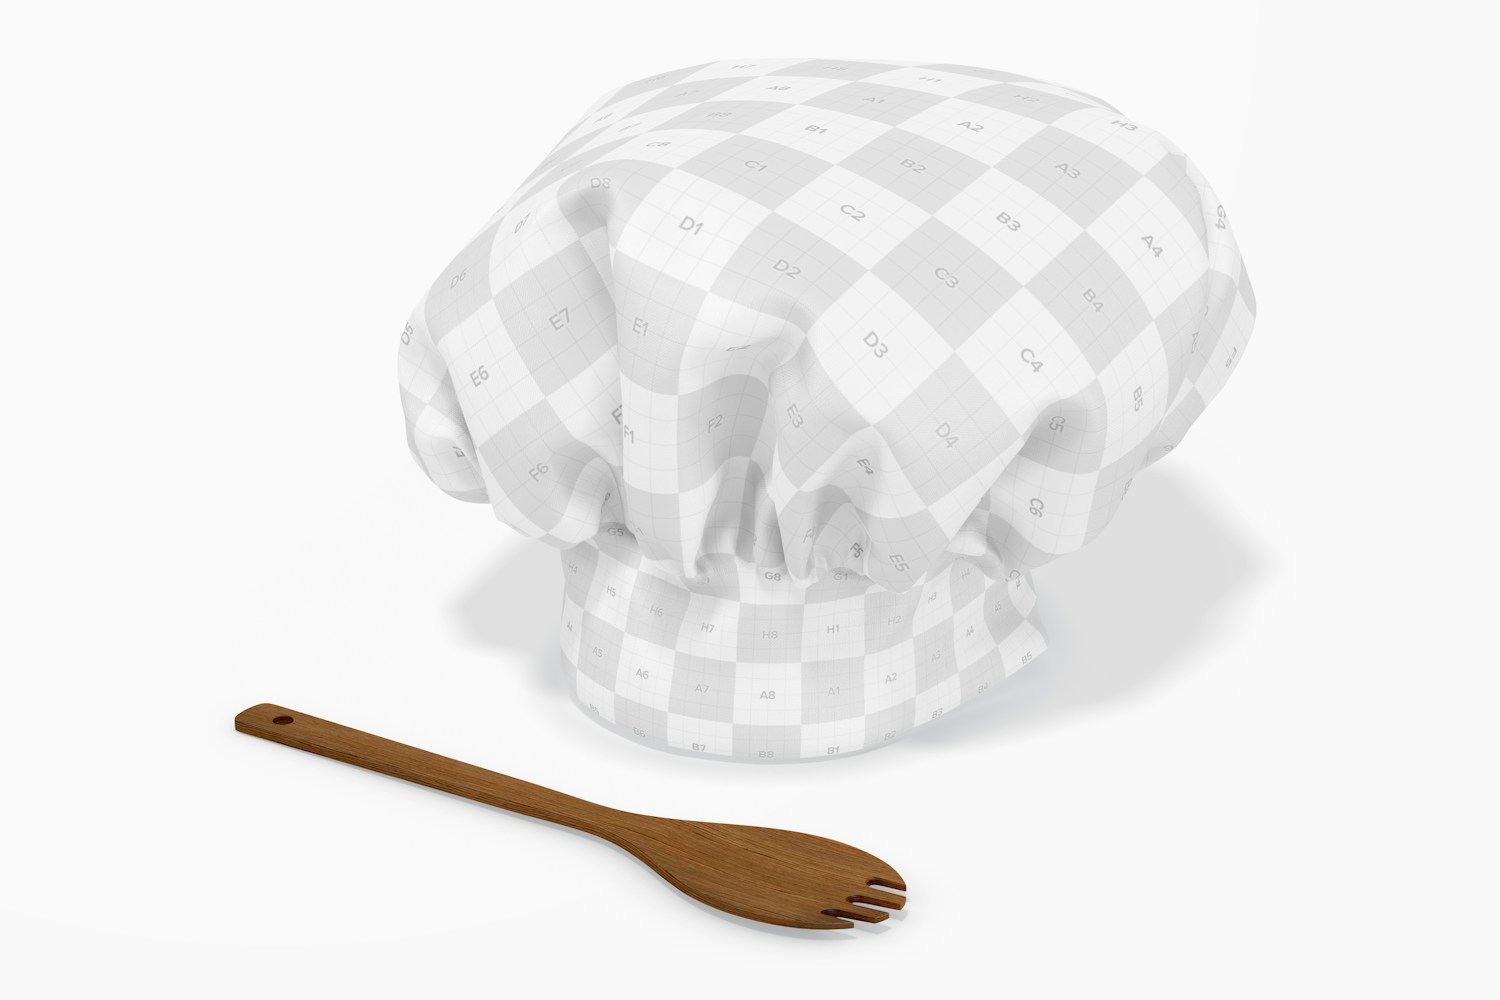 Chef Hat Mockup, with Spoon